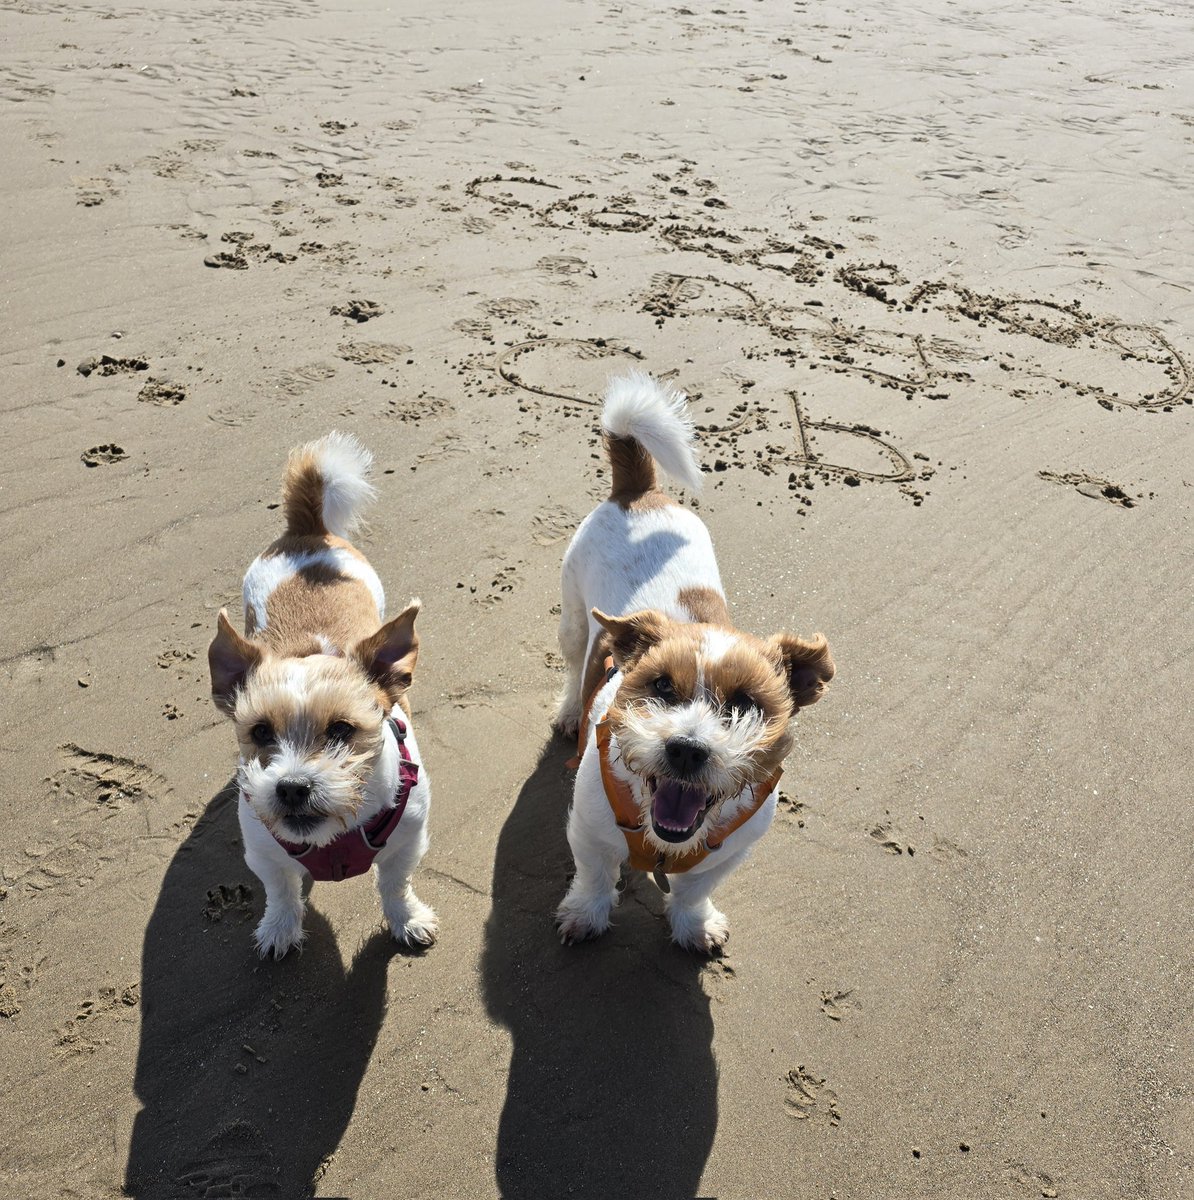 More photos from our beach day ⛱️🙏🏻🐾🏴󠁧󠁢󠁷󠁬󠁳󠁿❤️ #dogsofX